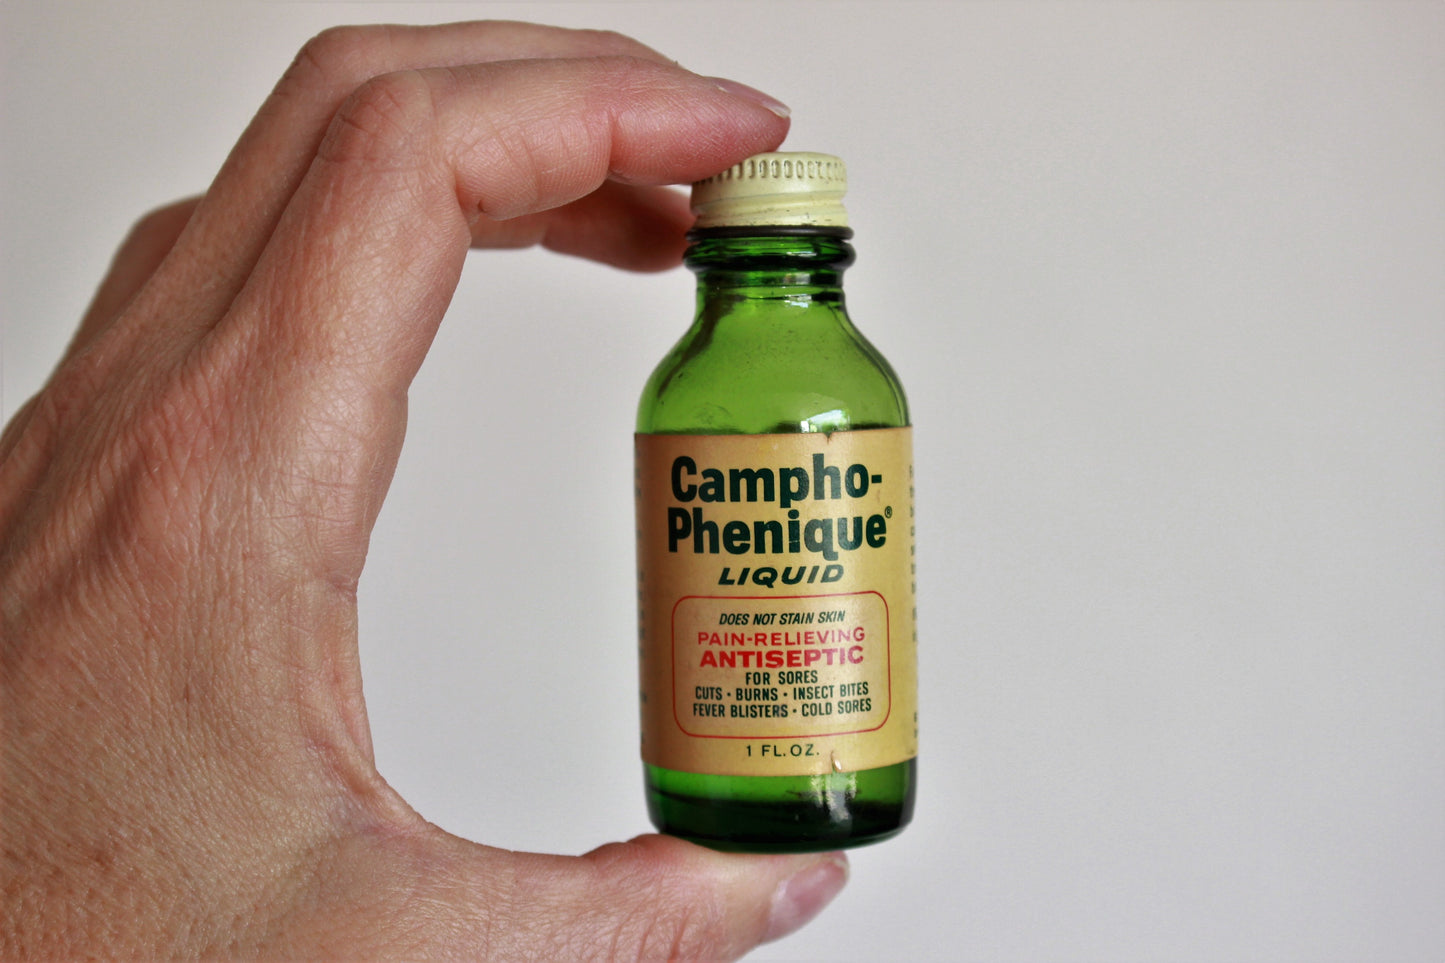 Vintage 1940s 1950s Campho-Phenique Liquid Antiseptic in Green Glass Bottle